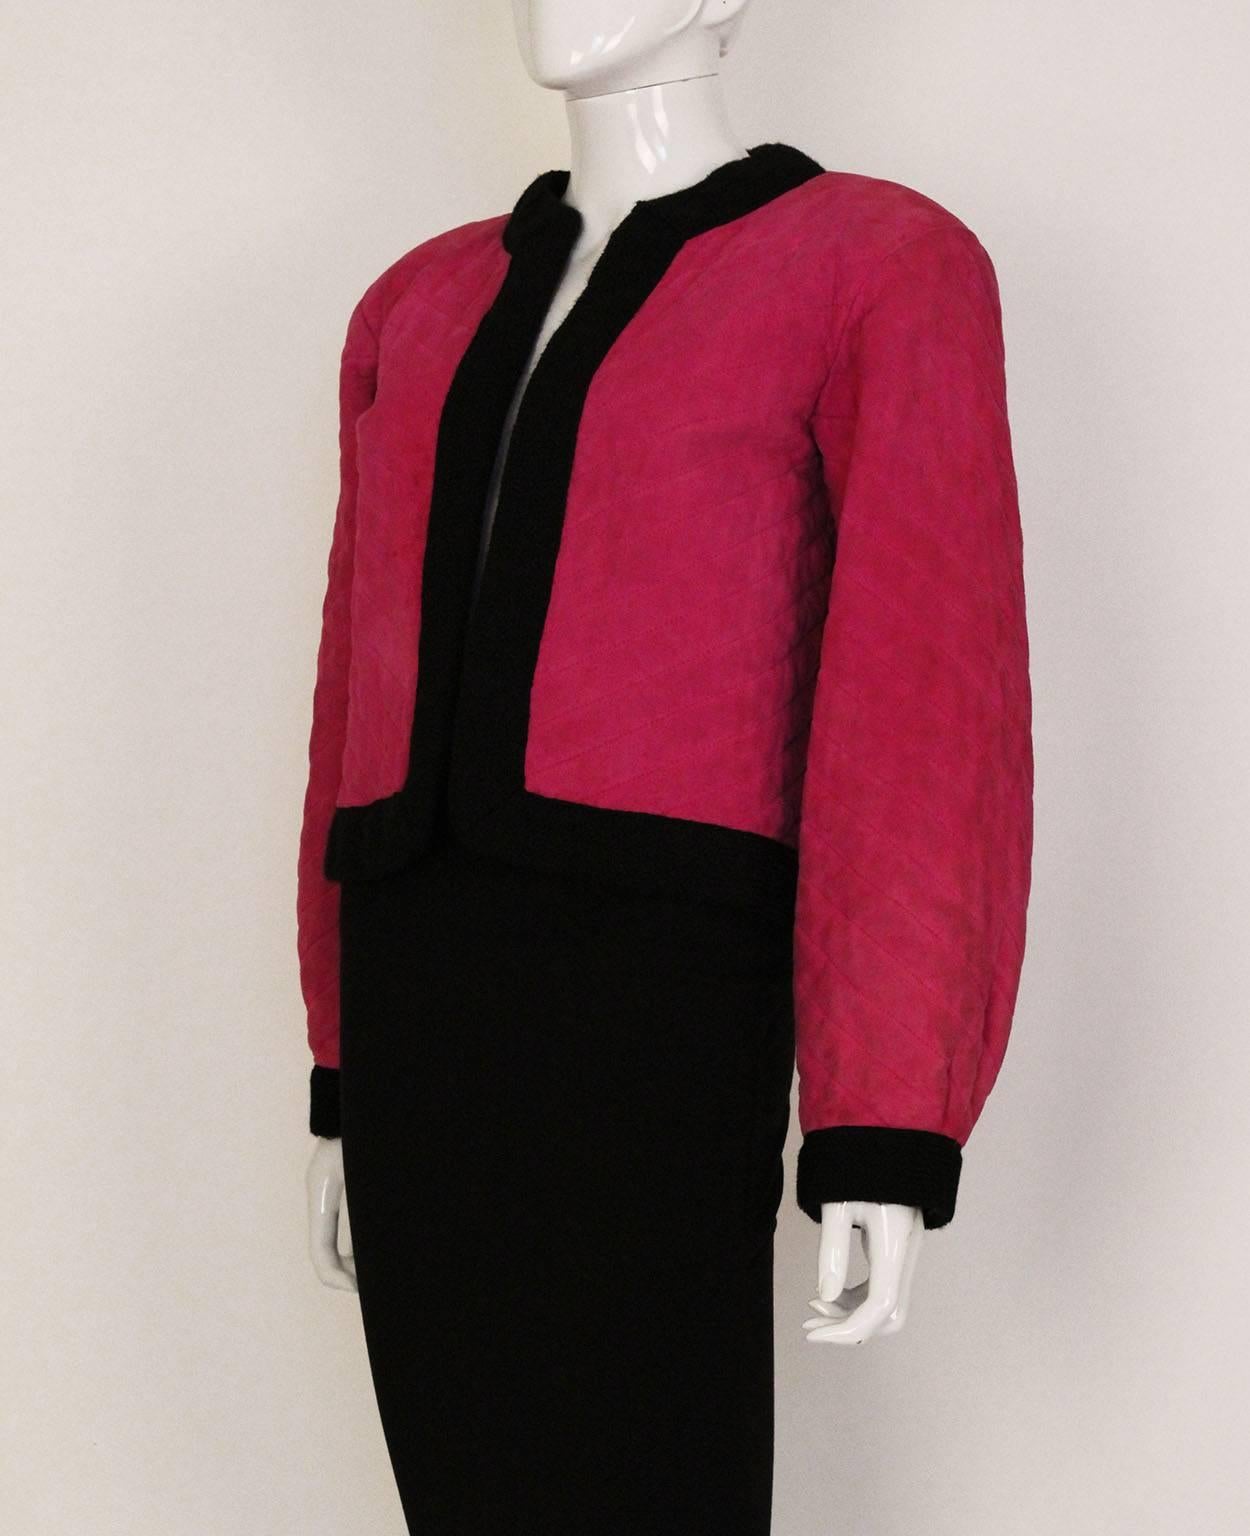 A colourful  and chic jacket by Yves Saint Laurent, model style V285.
The jacket is in a powerful pink quilted  suede , with a bright red wool/cotton mix lining.The cuffs,hem, collar and front opening are trimmed in black wool.
The jacket  is